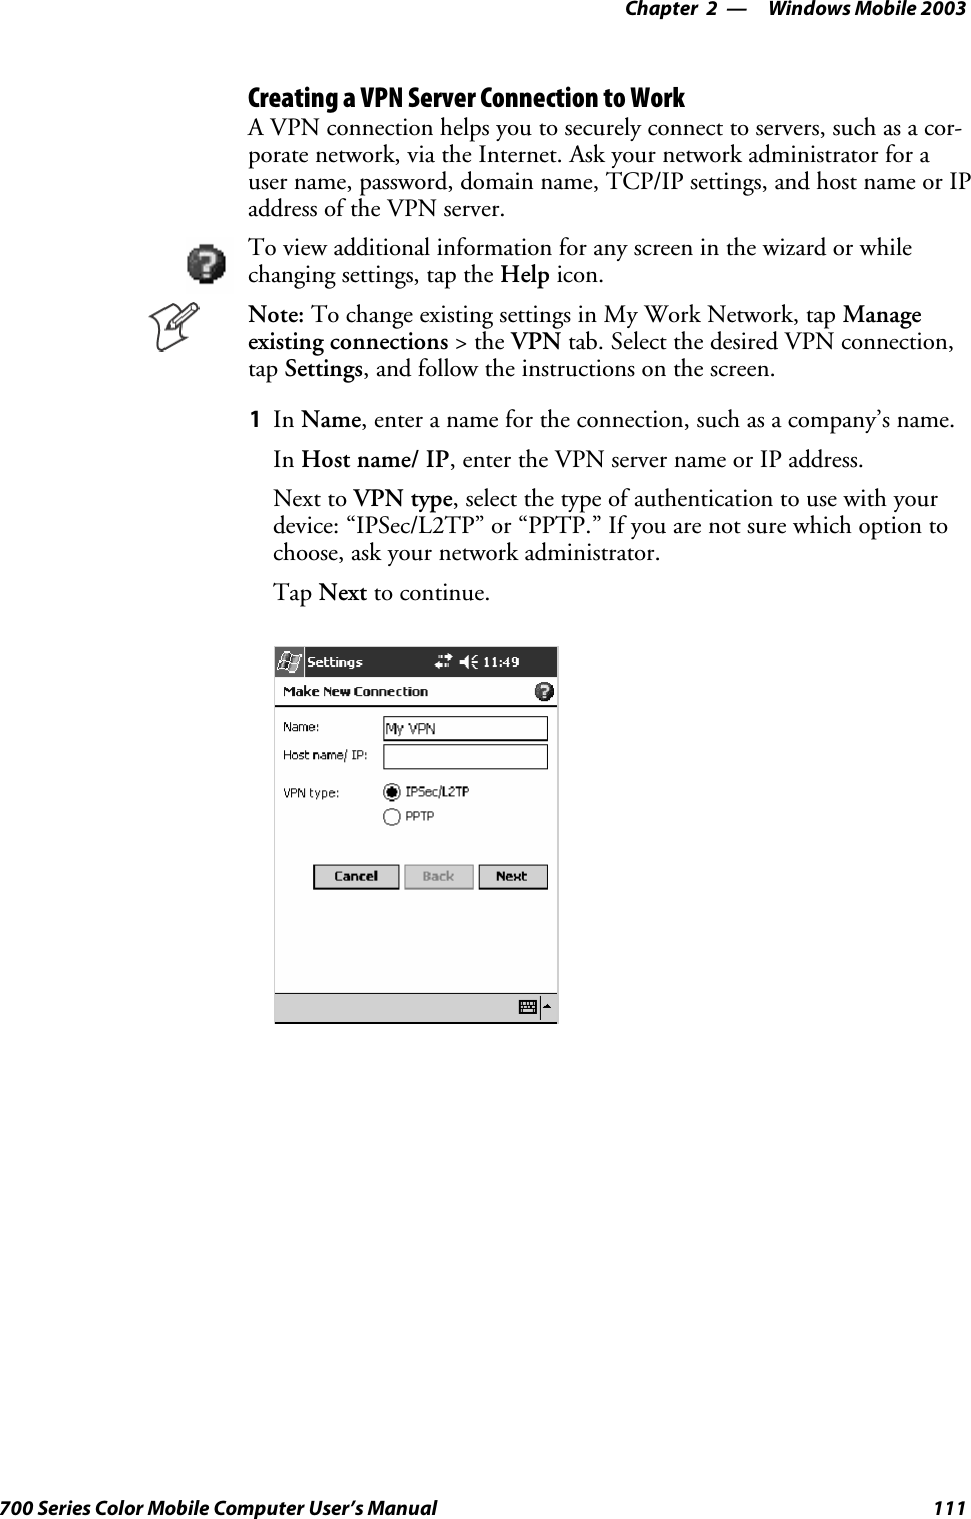 Windows Mobile 2003—Chapter 2111700 Series Color Mobile Computer User’s ManualCreating a VPN Server Connection to WorkA VPN connection helps you to securely connect to servers, such as a cor-porate network, via the Internet. Ask your network administrator for auser name, password, domain name, TCP/IP settings, and host name or IPaddress of the VPN server.To view additional information for any screen in the wizard or whilechanging settings, tap the Help icon.Note: To change existing settings in My Work Network, tap Manageexisting connections &gt;theVPN tab. Select the desired VPN connection,tap Settings, and follow the instructions on the screen.1In Name, enter a name for the connection, such as a company’s name.In Host name/ IP, enter the VPN server name or IP address.Next to VPN type, select the type of authentication to use with yourdevice: “IPSec/L2TP” or “PPTP.” If you are not sure which option tochoose, ask your network administrator.Tap Next to continue.